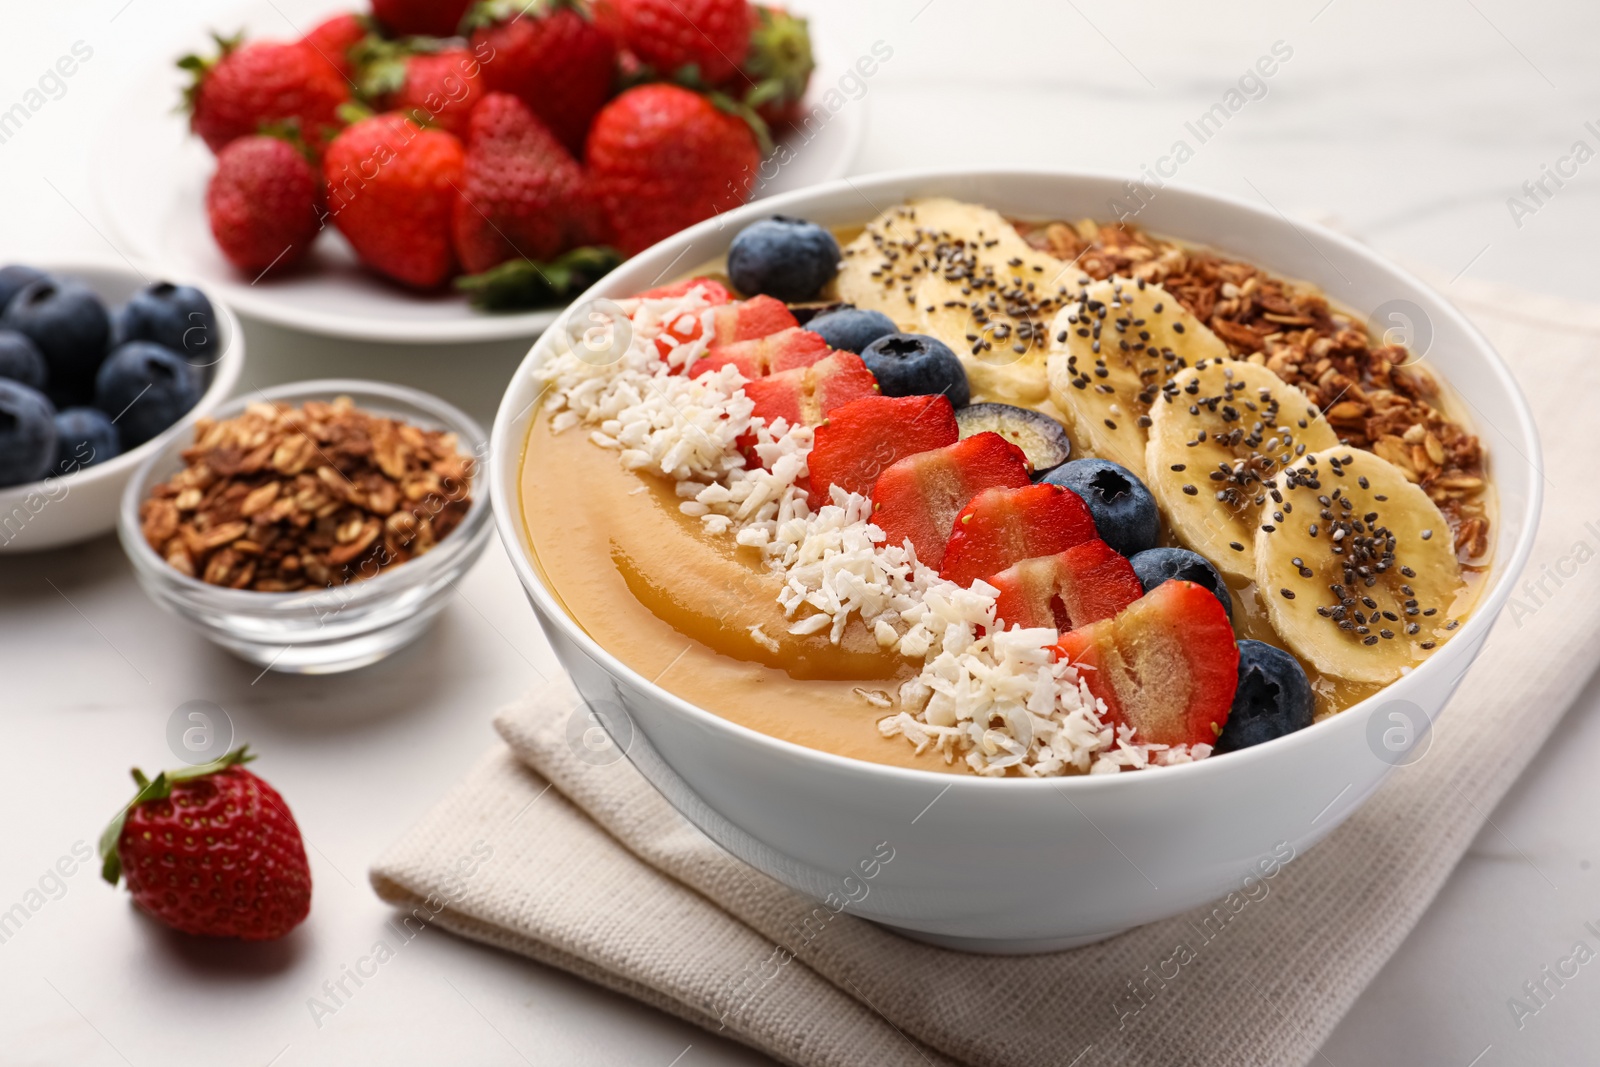 Photo of Delicious smoothie bowl with fresh berries, banana, coconut flakes and granola on white table, closeup